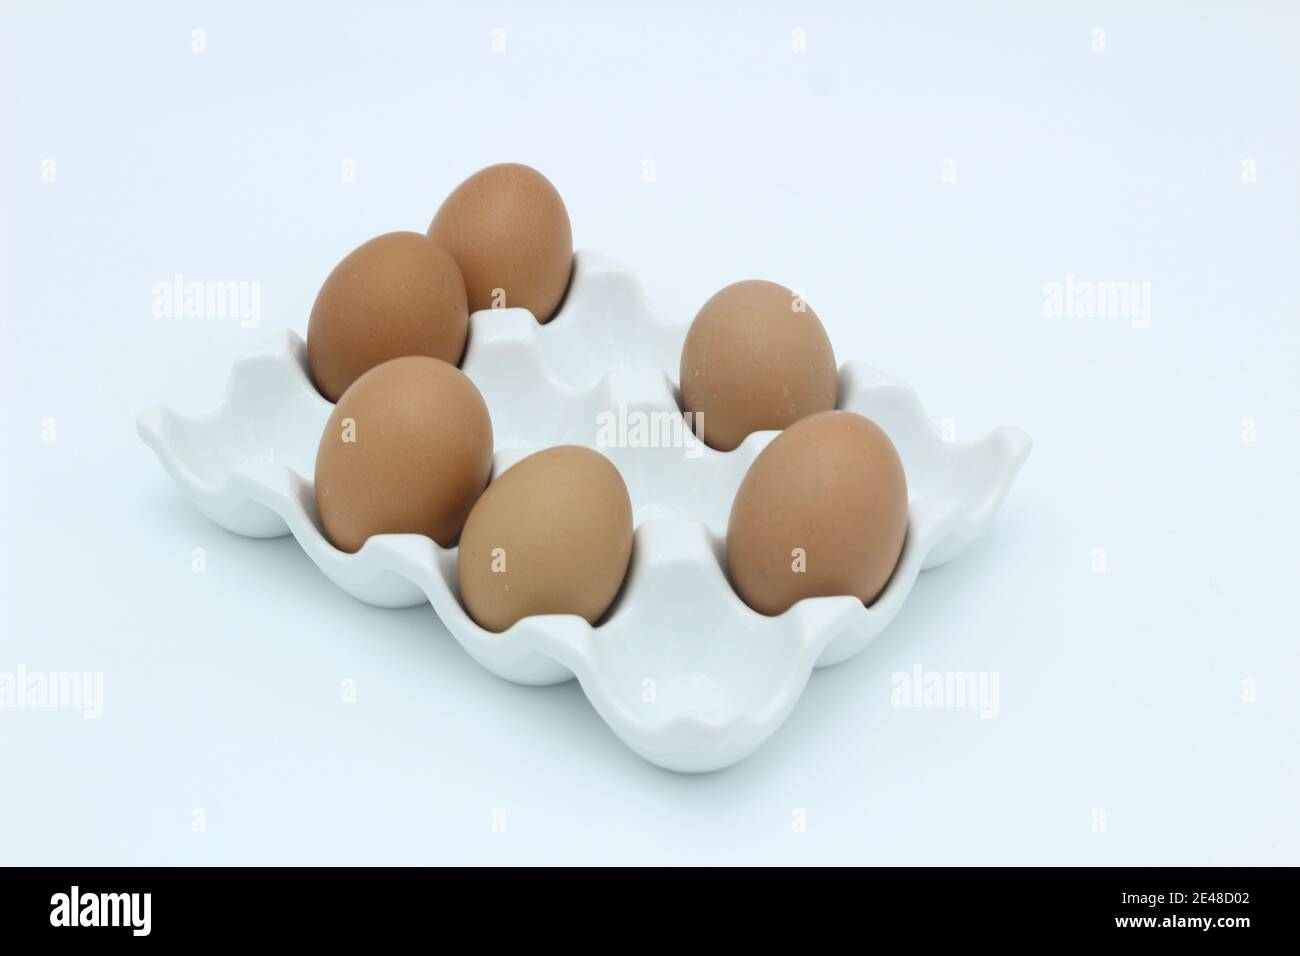 Six brown eggs in an egg rack against a white background Stock Photo